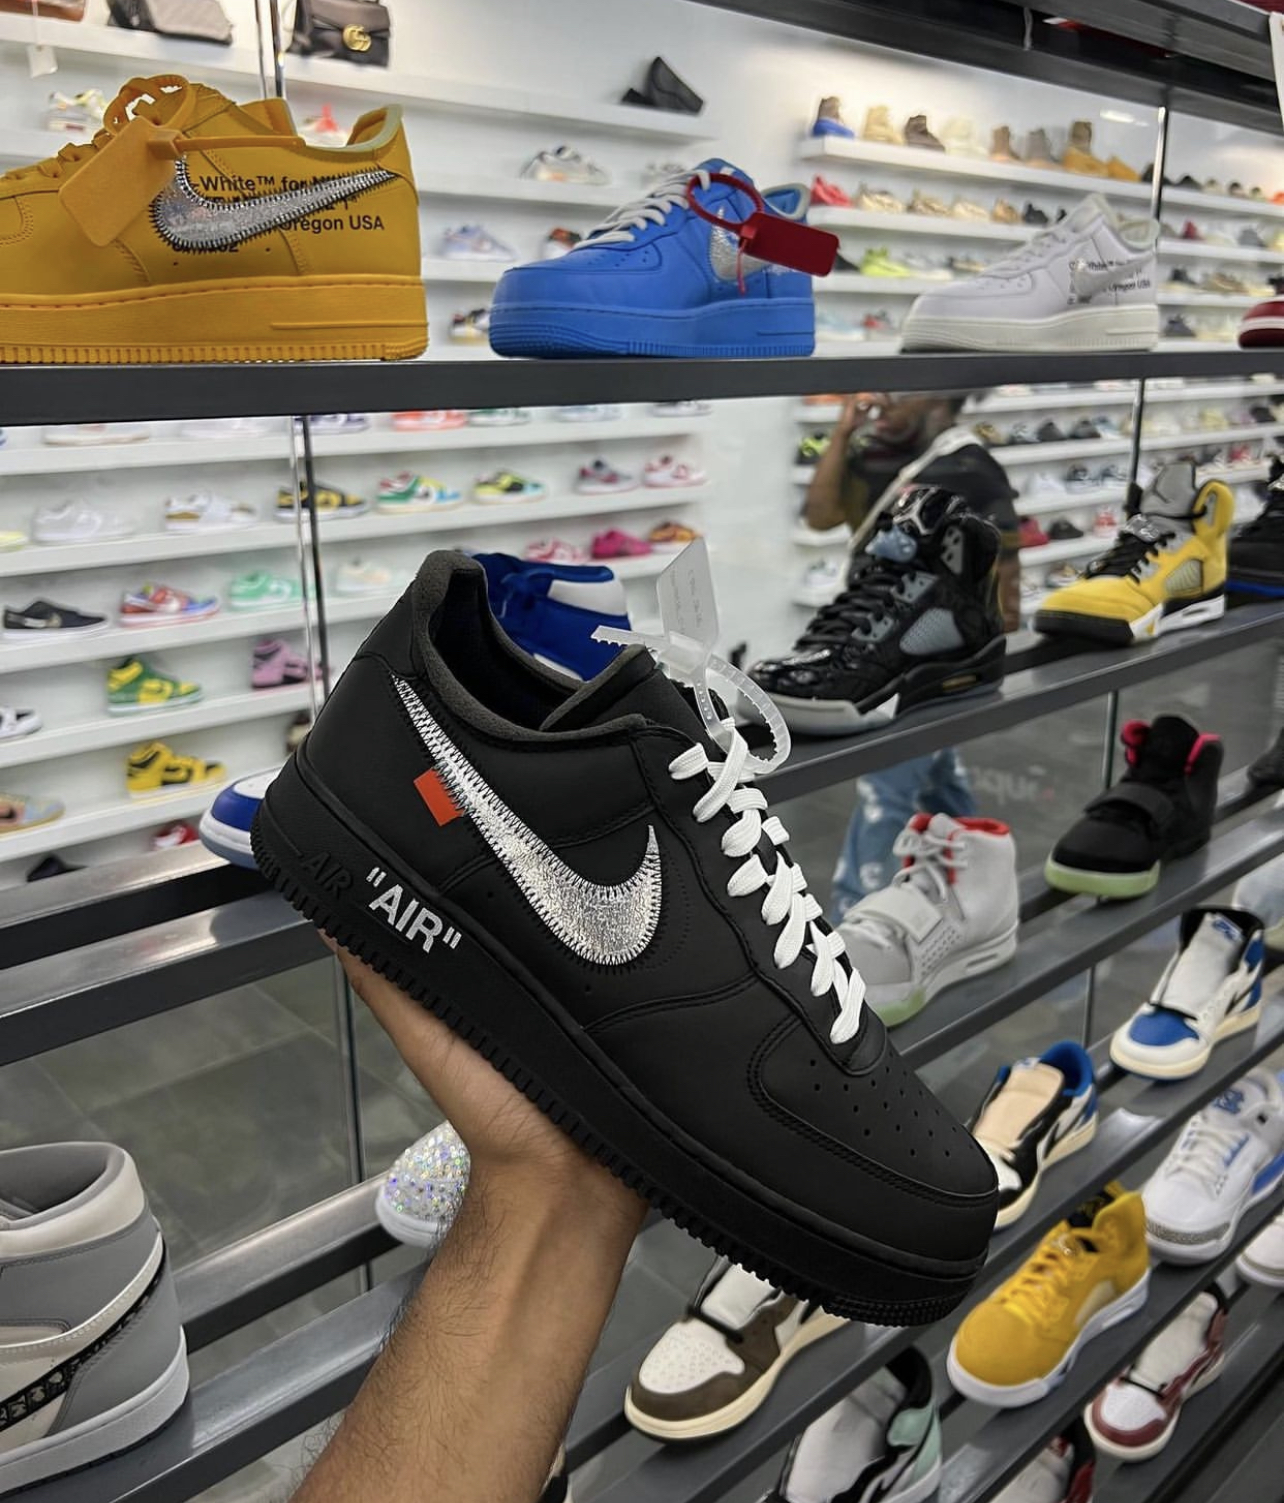 Nike Air Force 1 Low '07 Off-White MoMA (without Socks) (Copy) in 2023